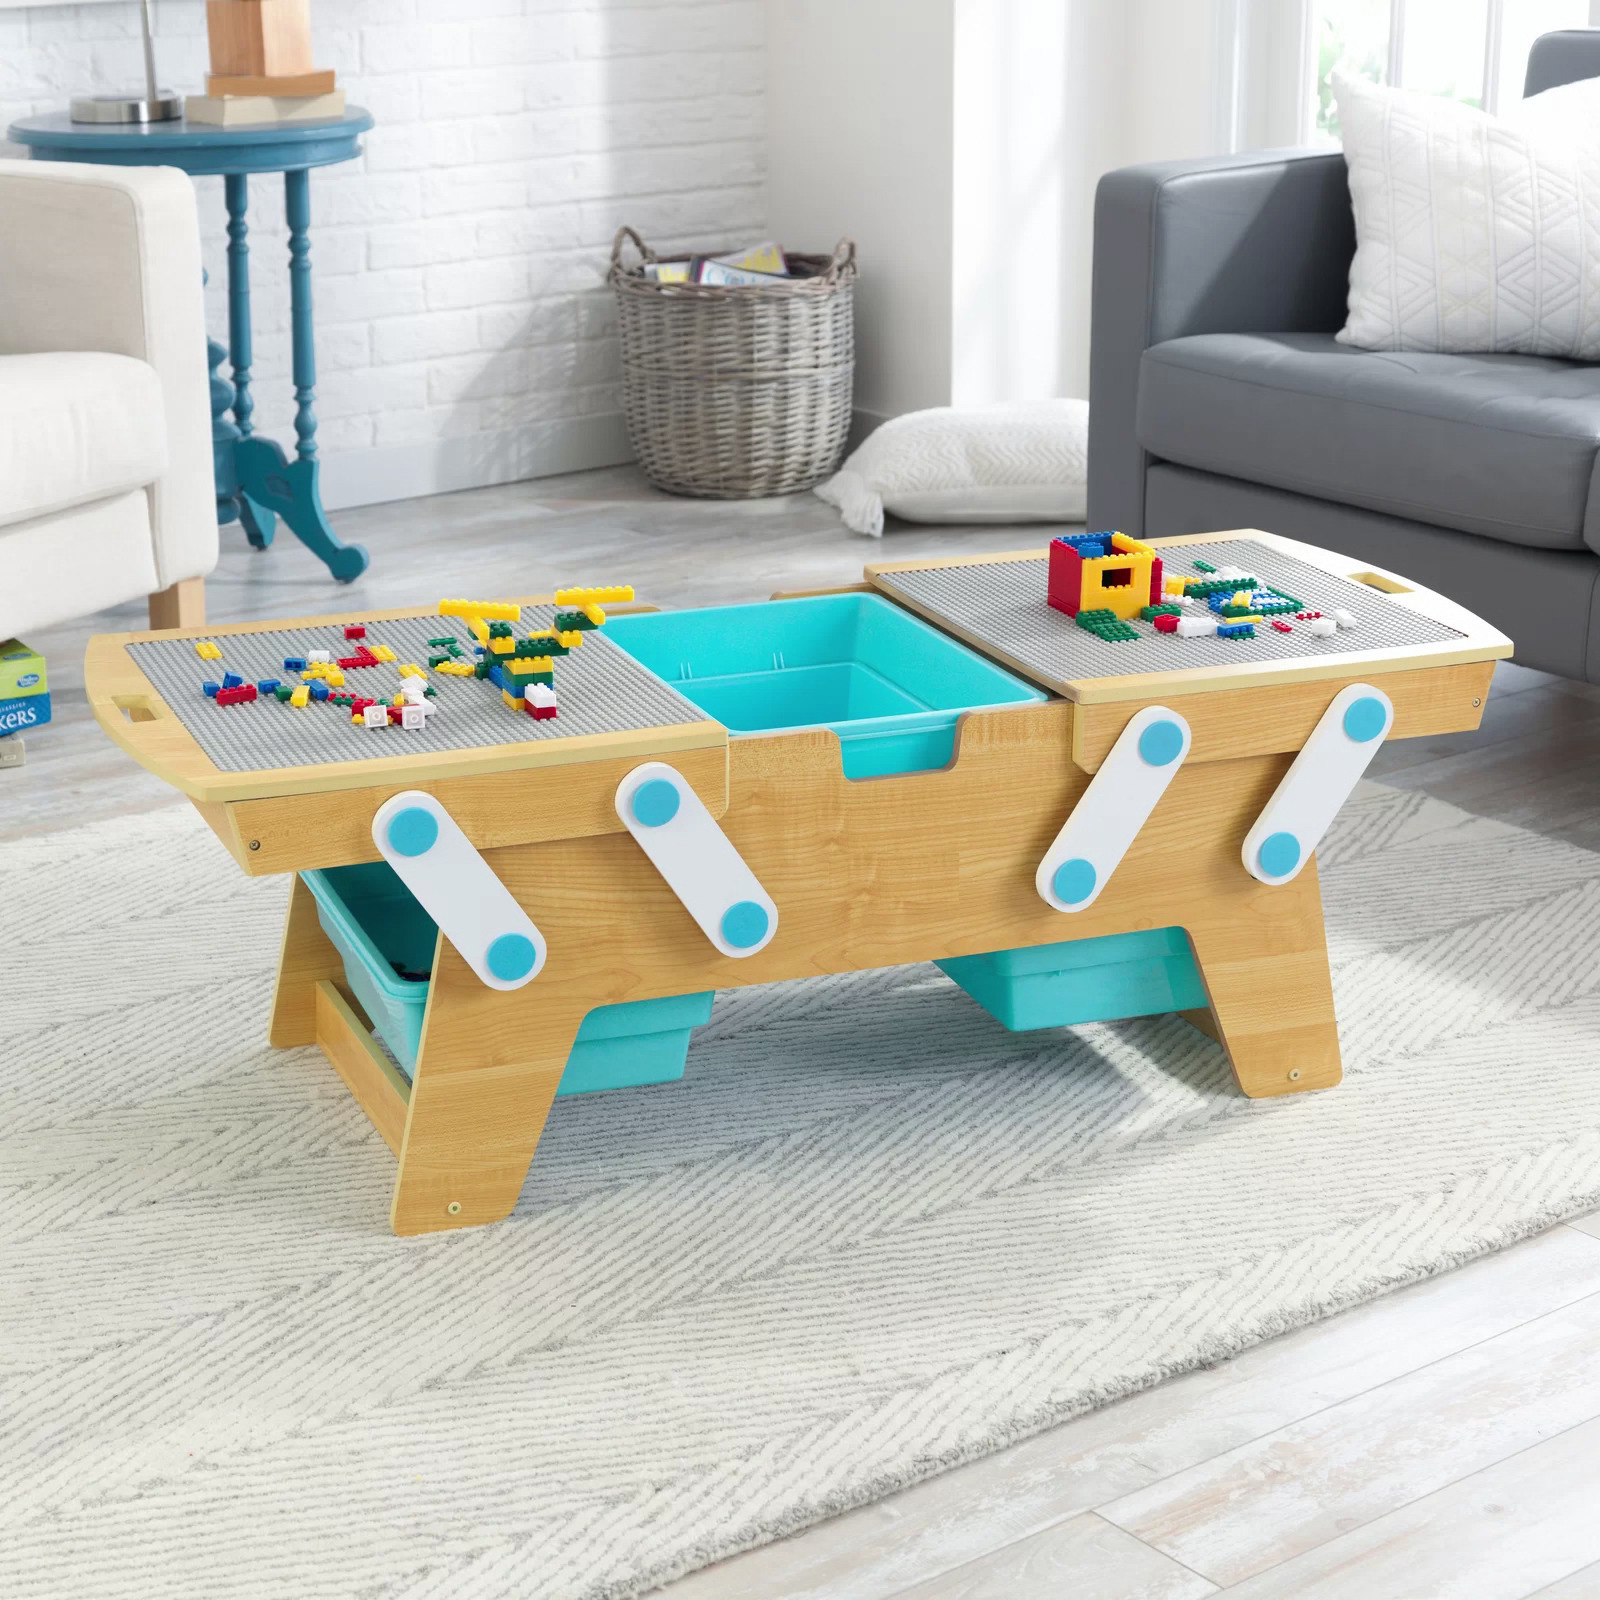 Childs Play Wood Table Top Basic Play Store and Stage 24 Width x 32 Height x 16 Depth 